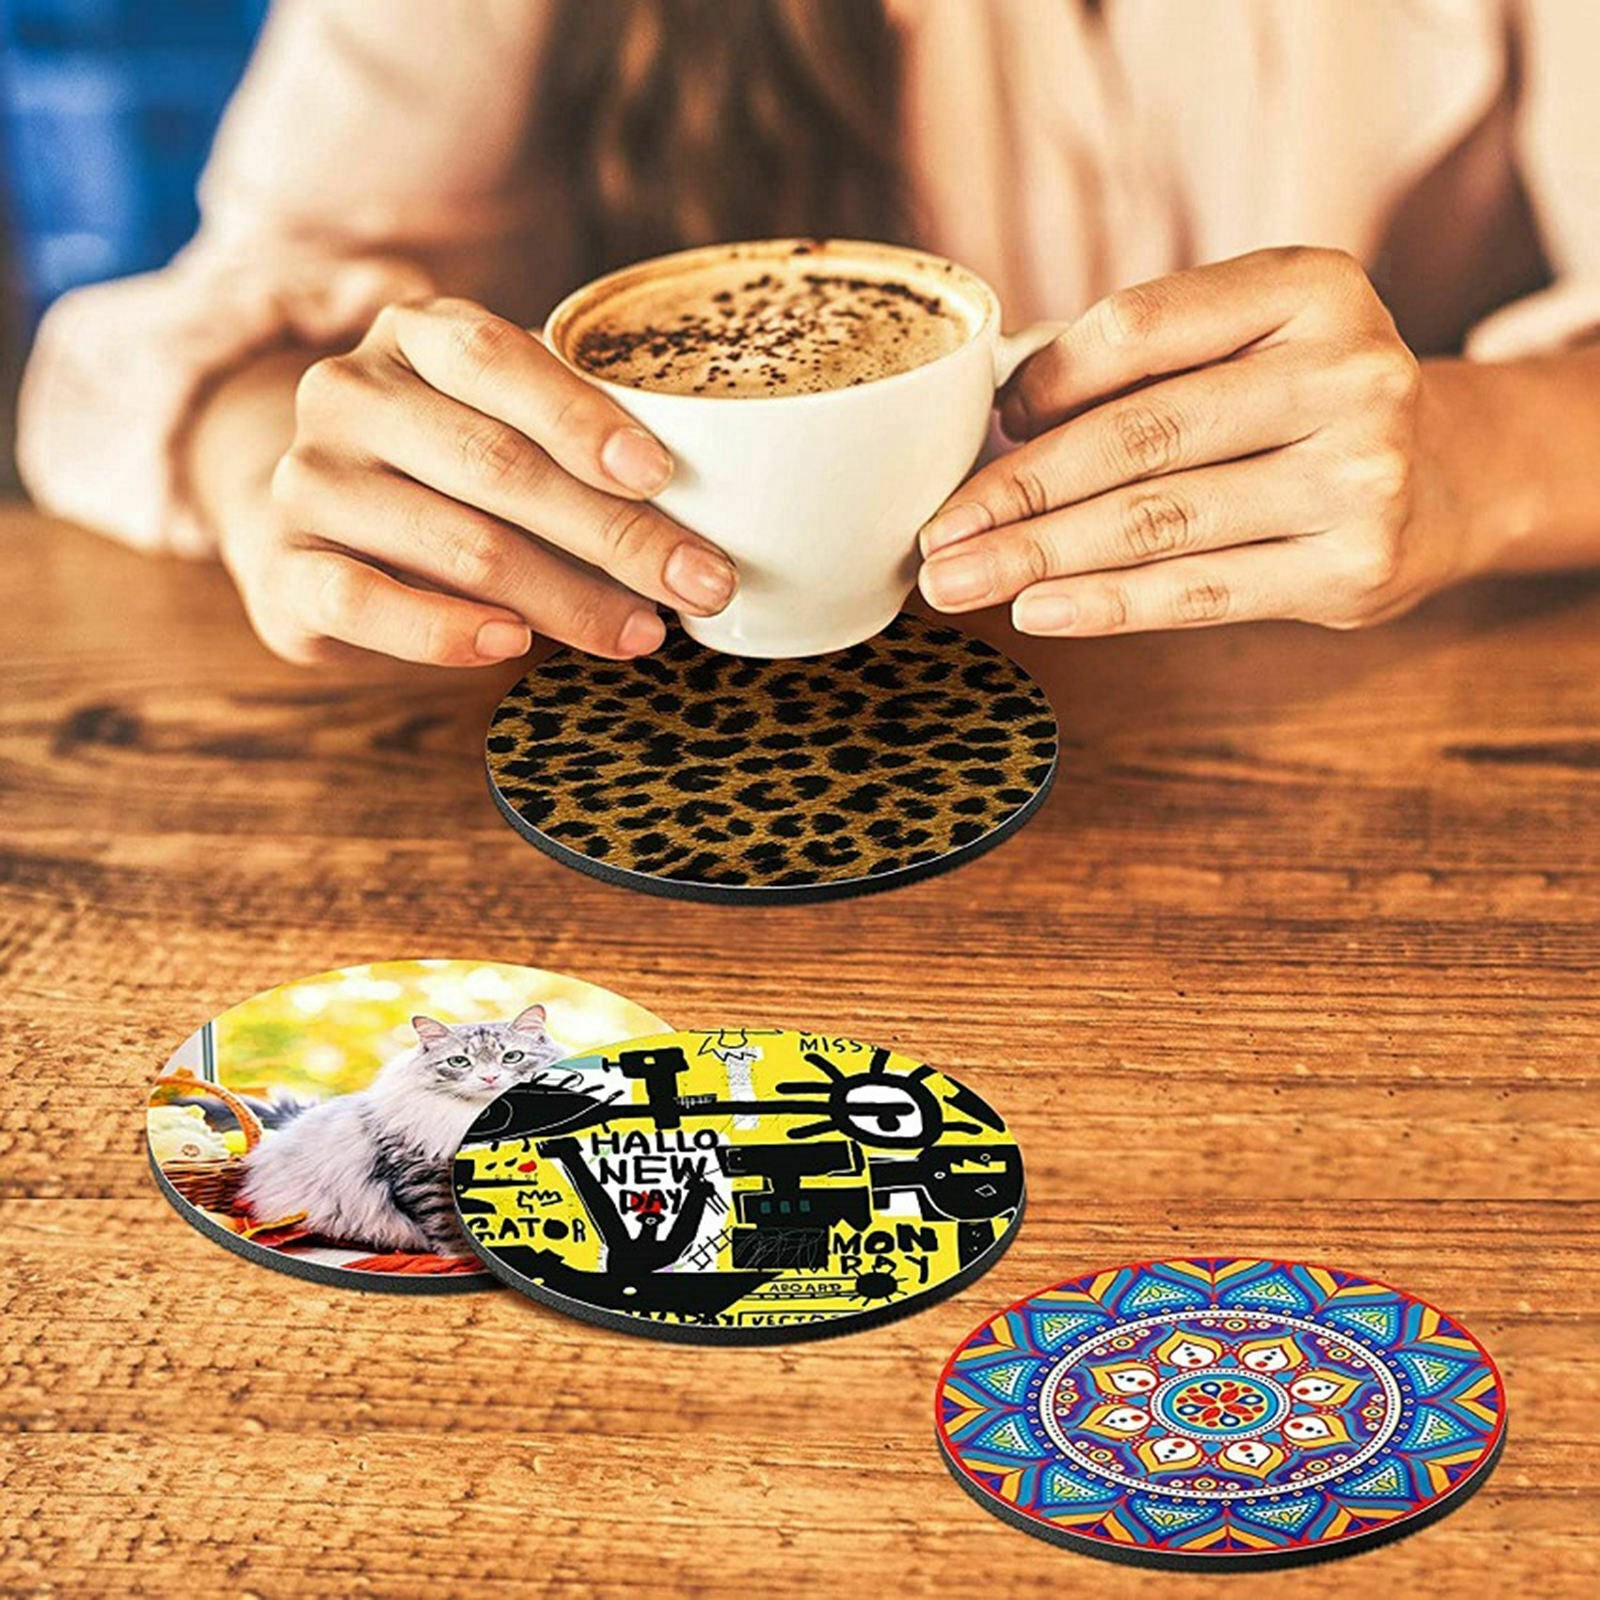 20x Sublimation Blank 10cm Circle Neoprene Coasters with non-slip bottom